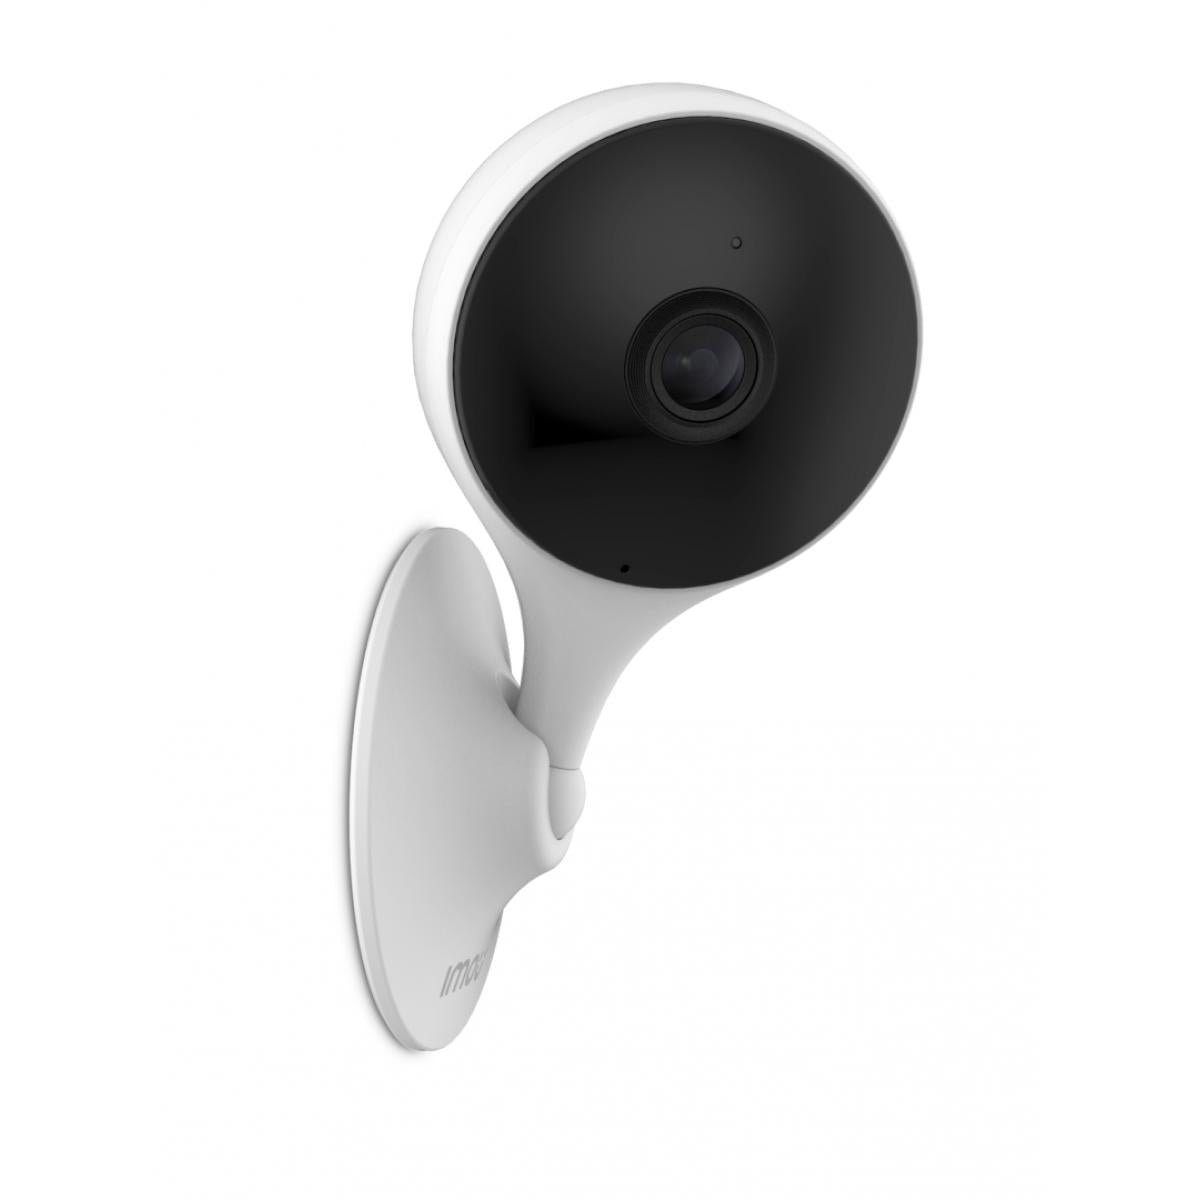 Imou Cue 2 smart home security solutions 1080p